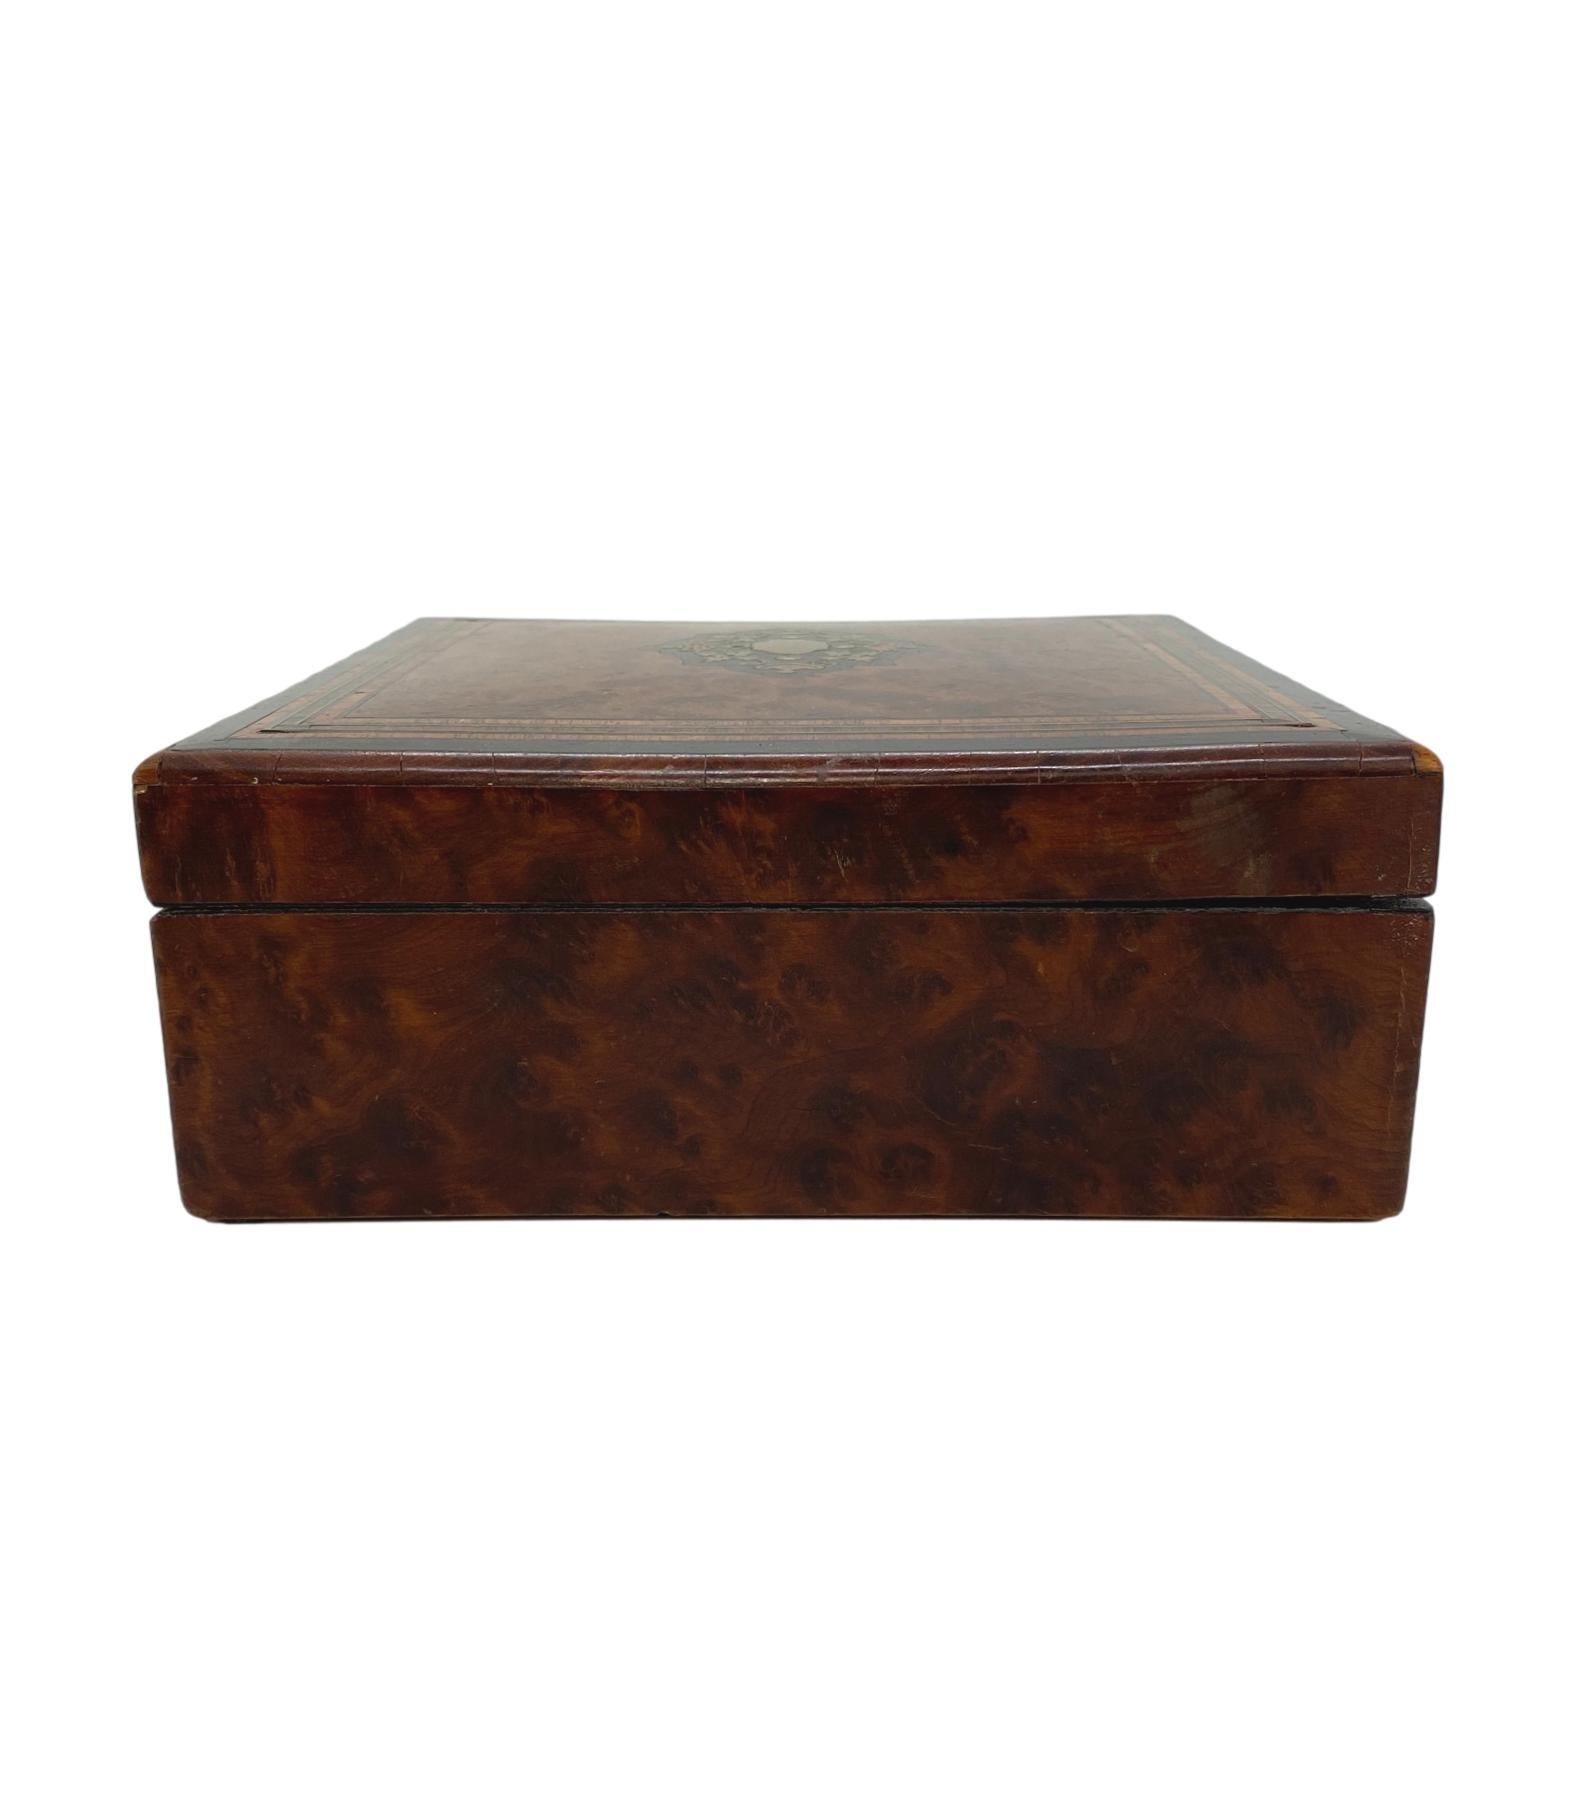 Antique Belle Époque Burl Walnut Box with Brass, Ebony Inlay, French, circa 1880 In Good Condition For Sale In Banner Elk, NC